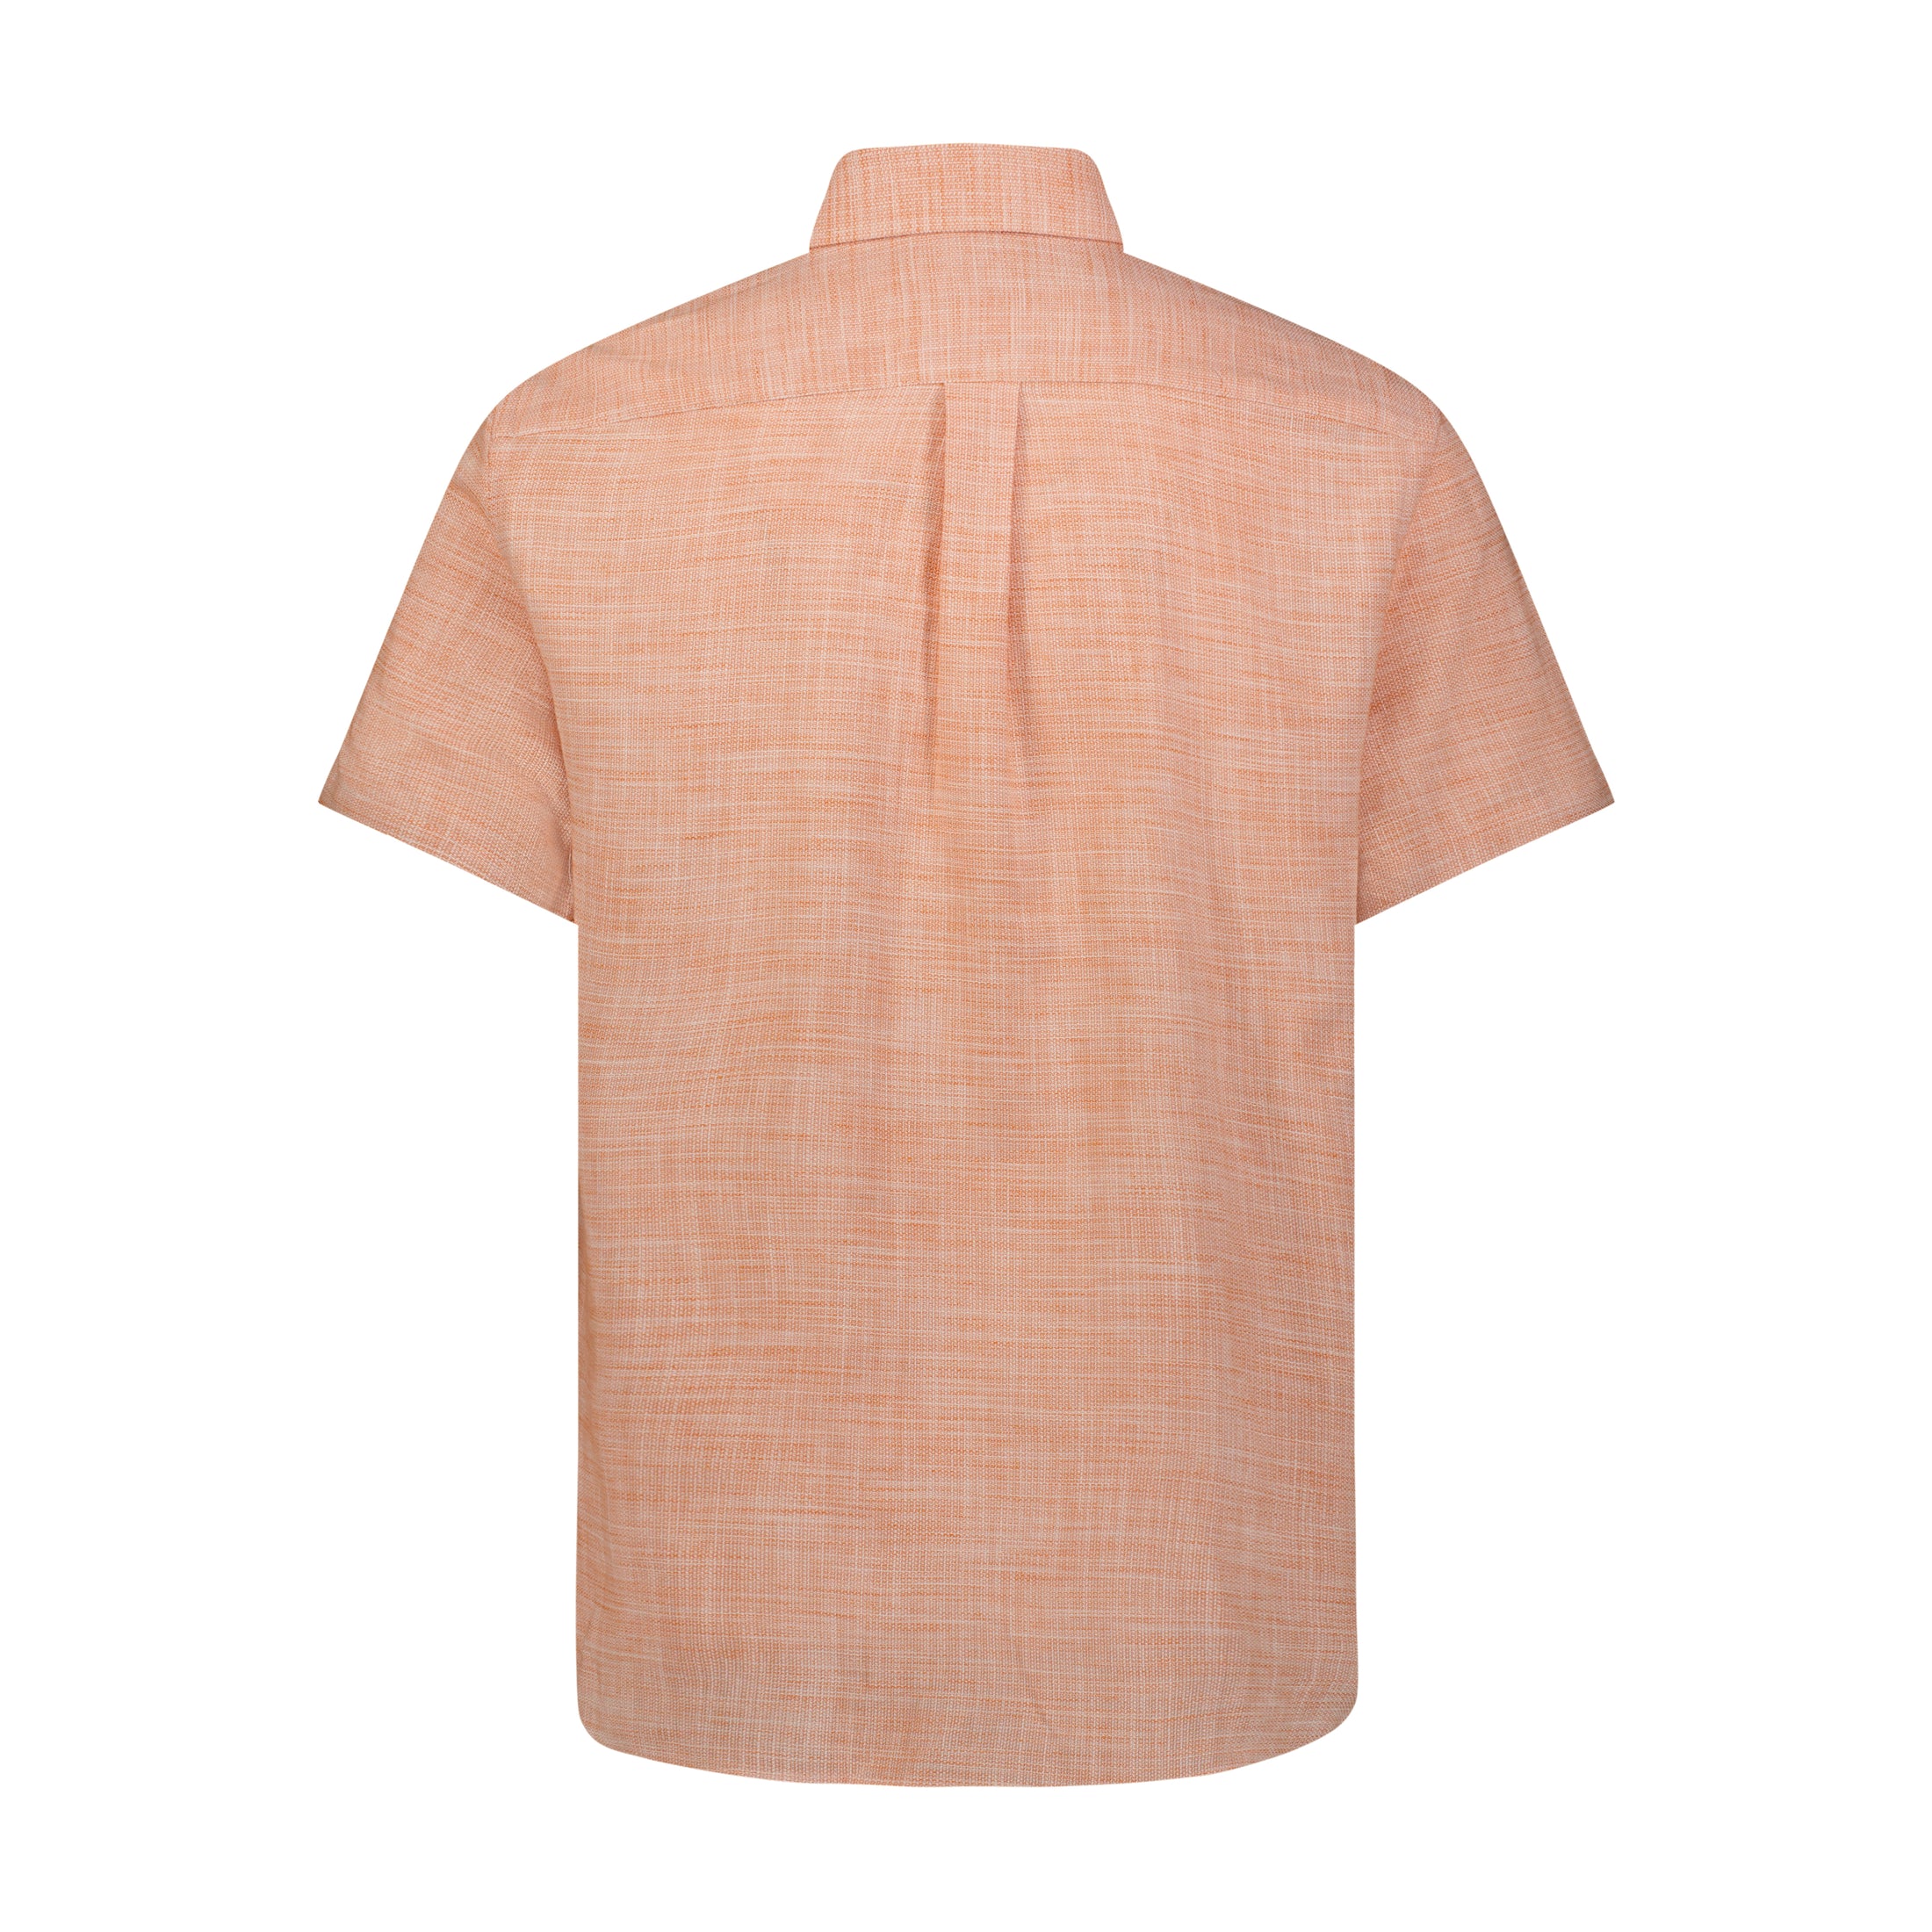 Peach and White Heather Short Sleeve Woven Weave Shirt